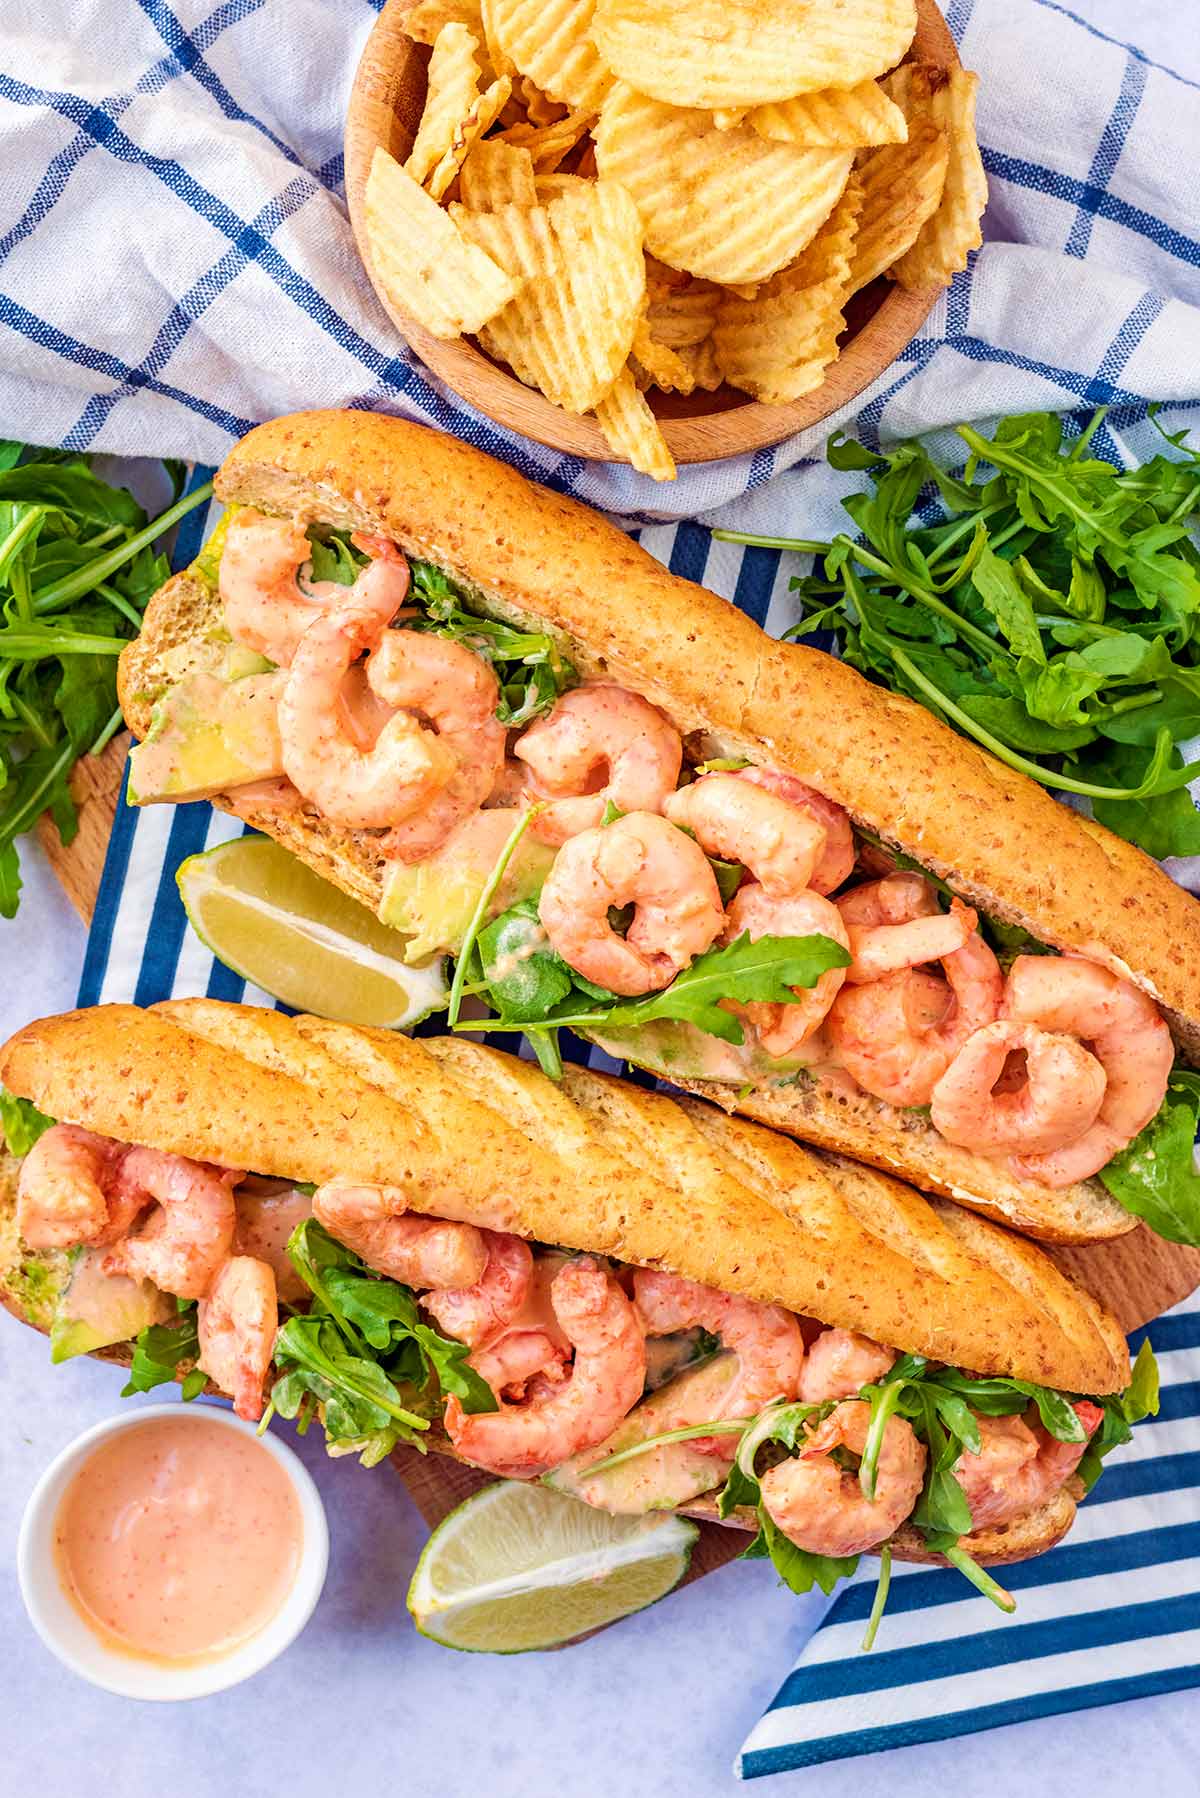 Two baguettes filled with salad and prawns in a creamy sauce.